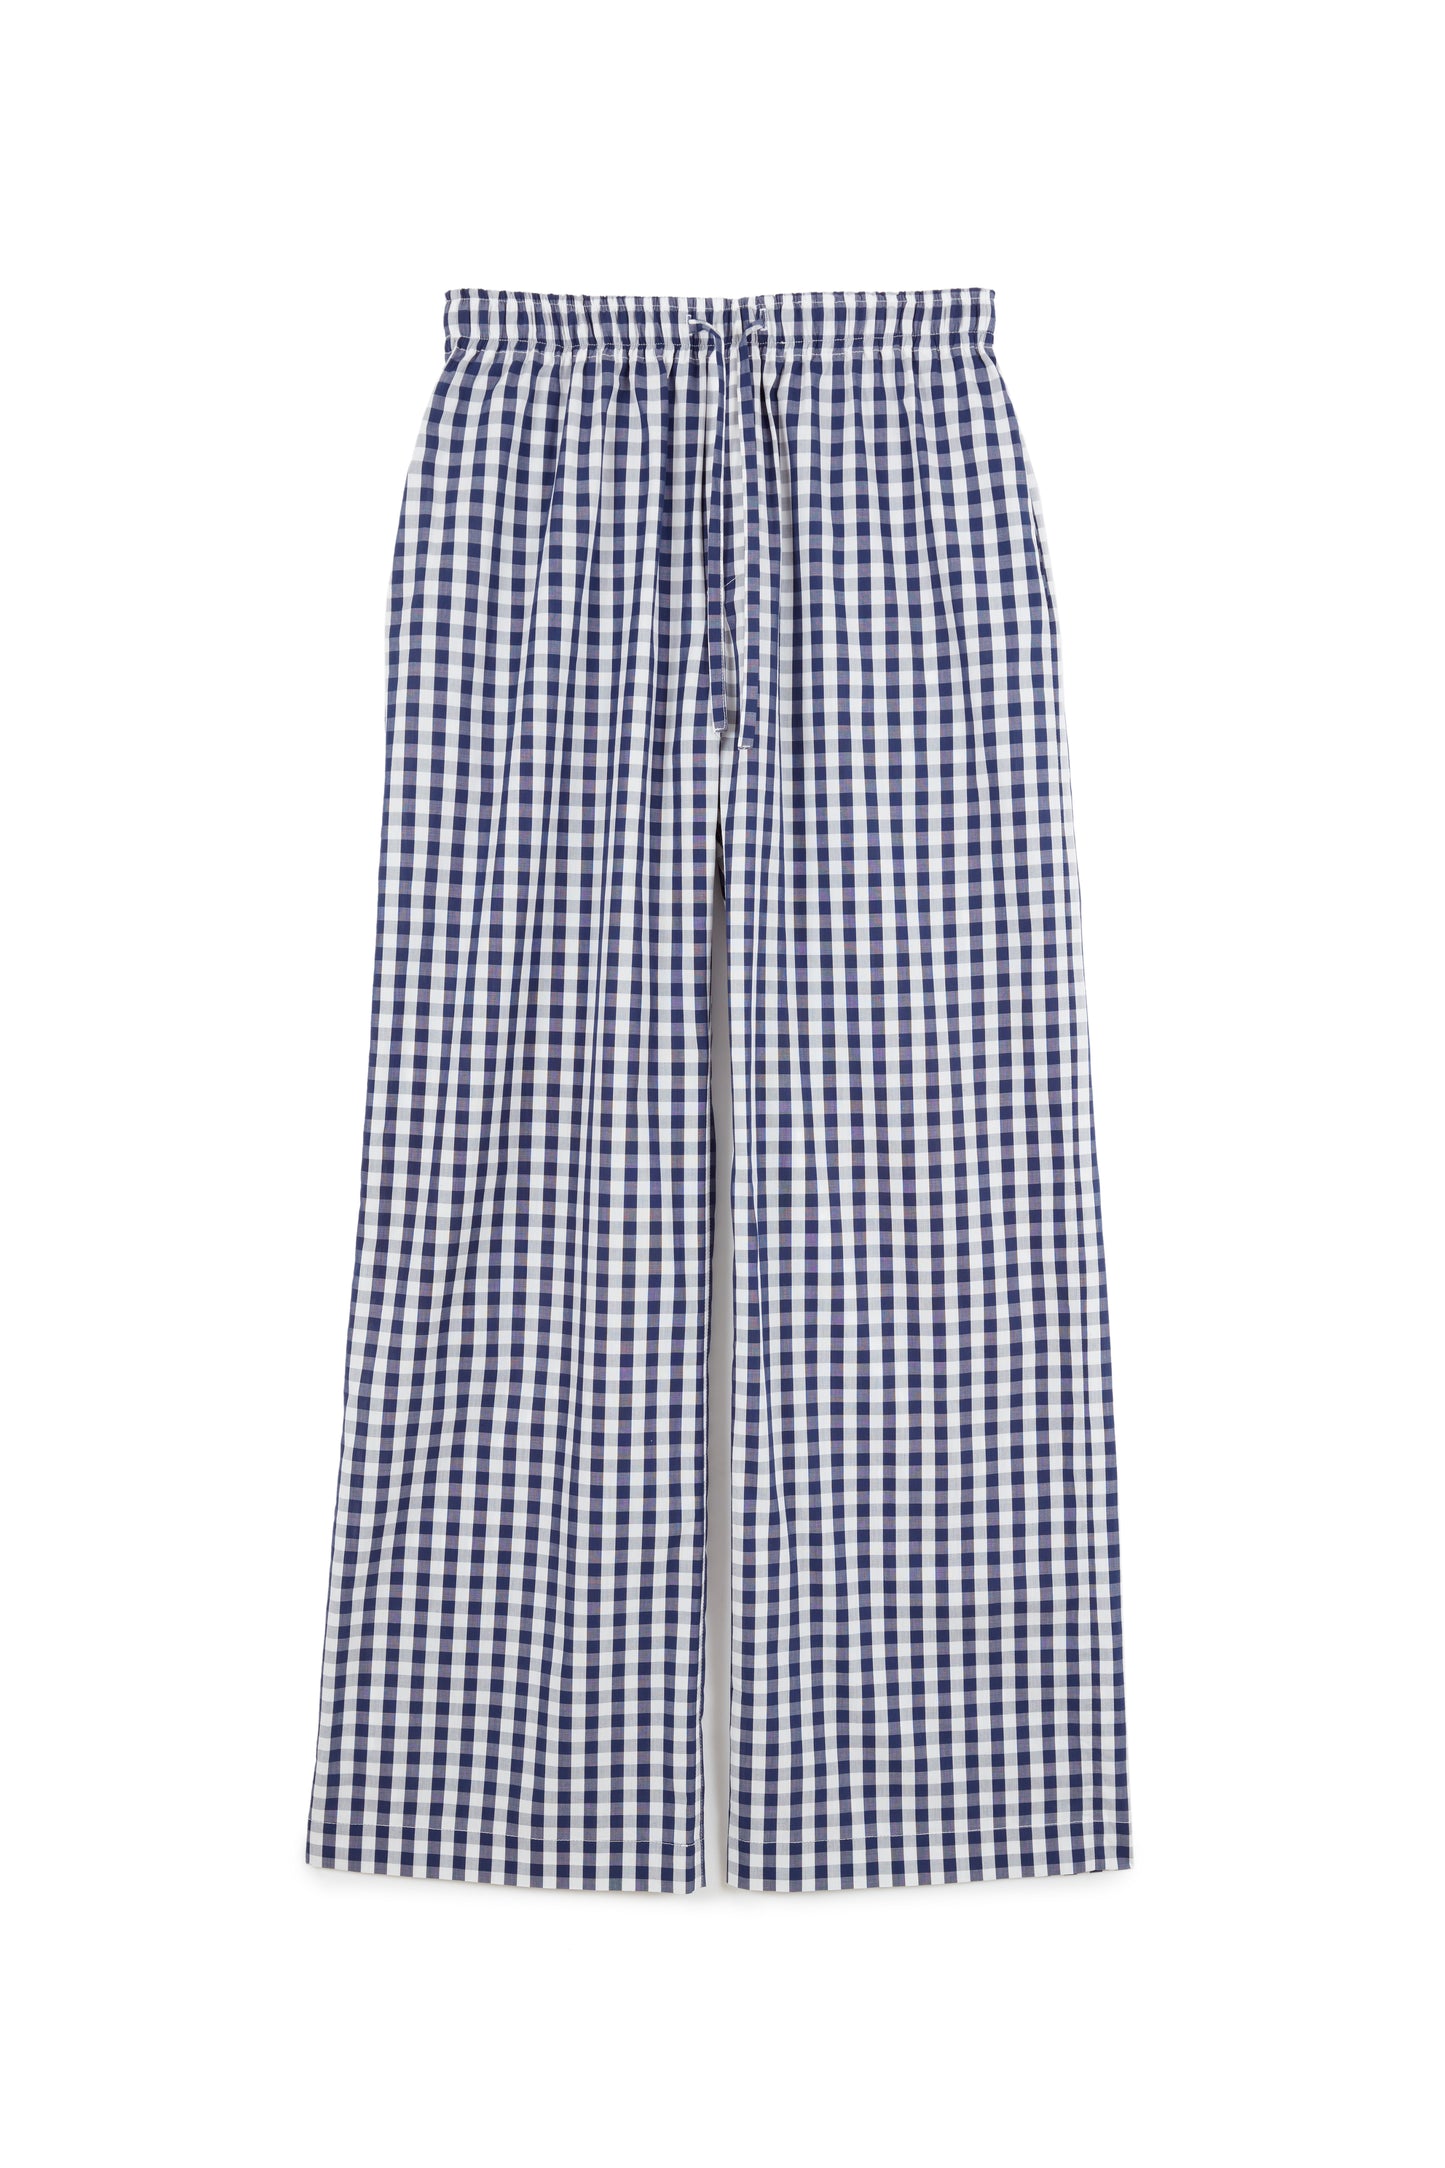 Summer Pants Small - Gingham